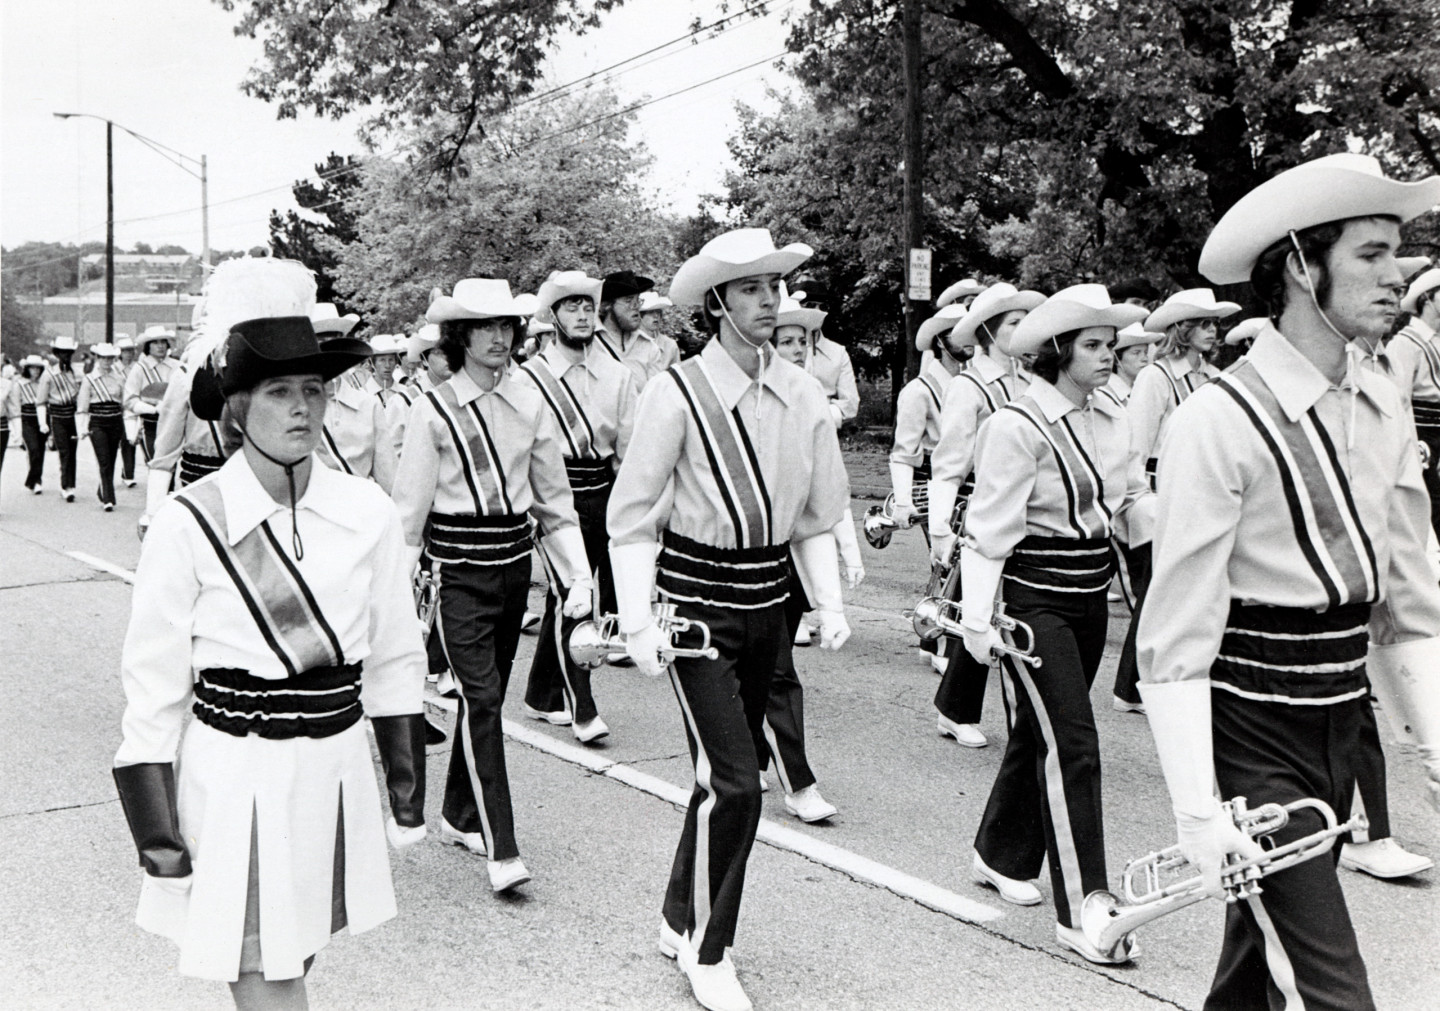 Bronco Marching Band members march in a parade.